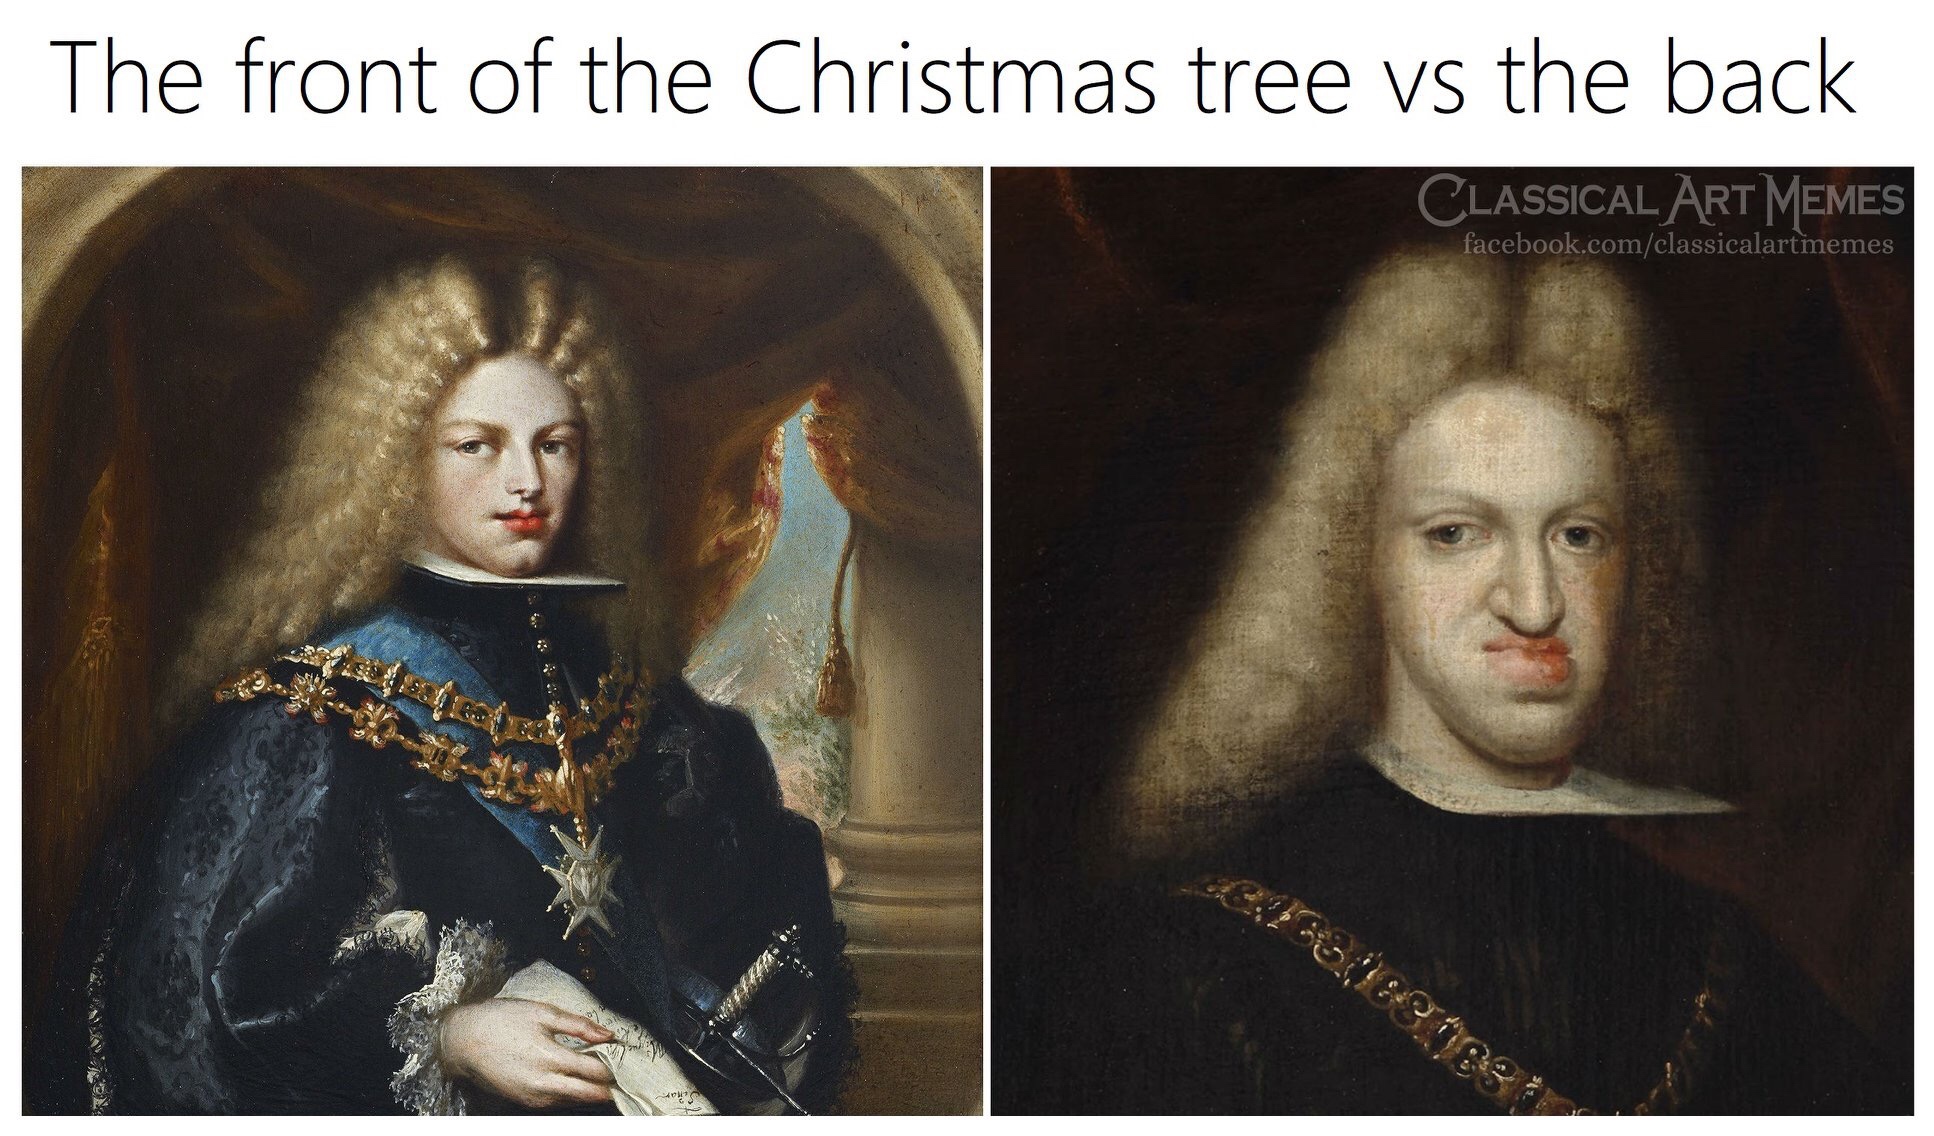 art memes - The front of the Christmas tree vs the back Classical Art Memes facebook.comclassionlarthemes